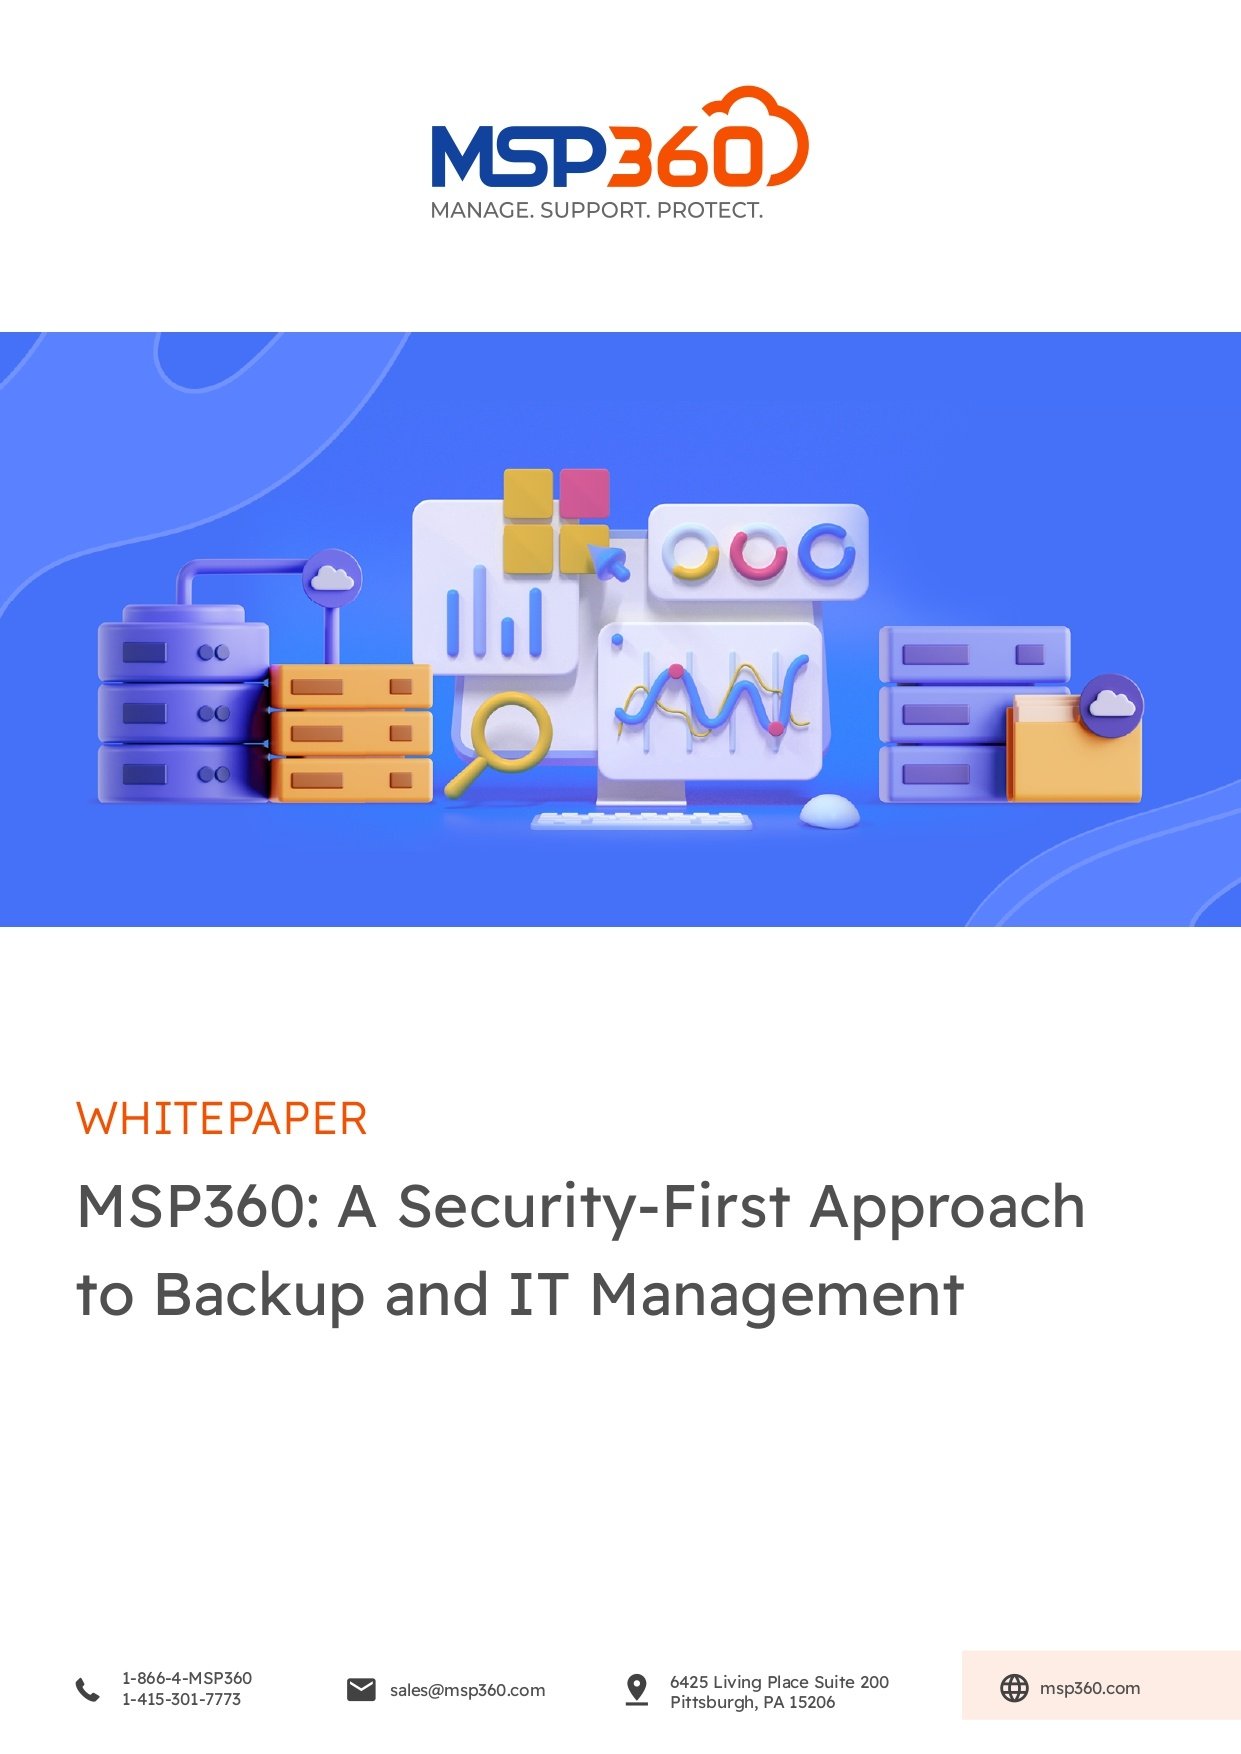 MSP360 A Security-First Approach to Backup and IT Management new_page-0001